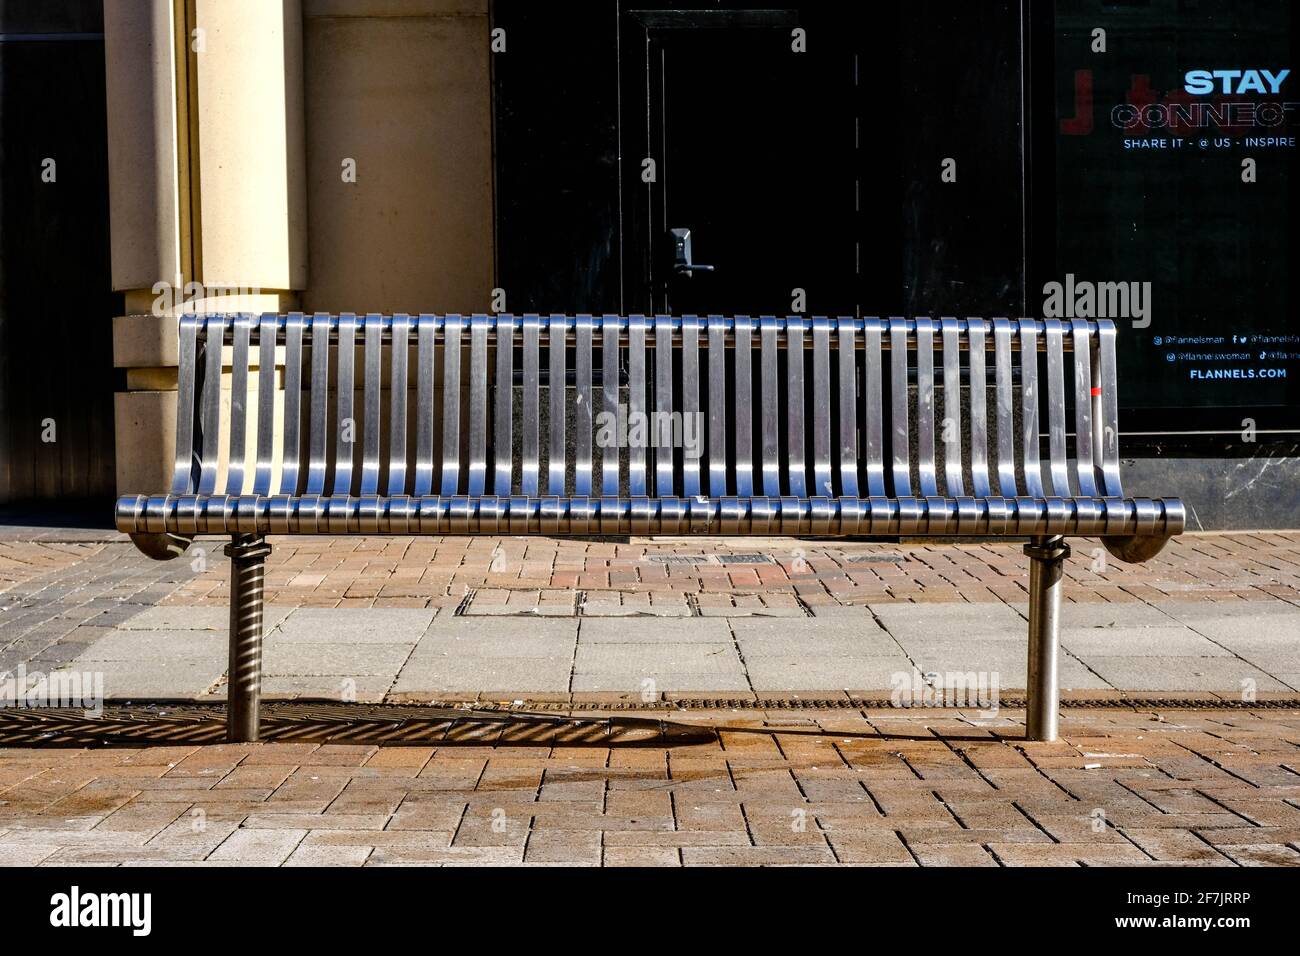 Kingston, London UK, April 7 2021, Public Outside Seating Seat Or Bench With No People Stock Photo